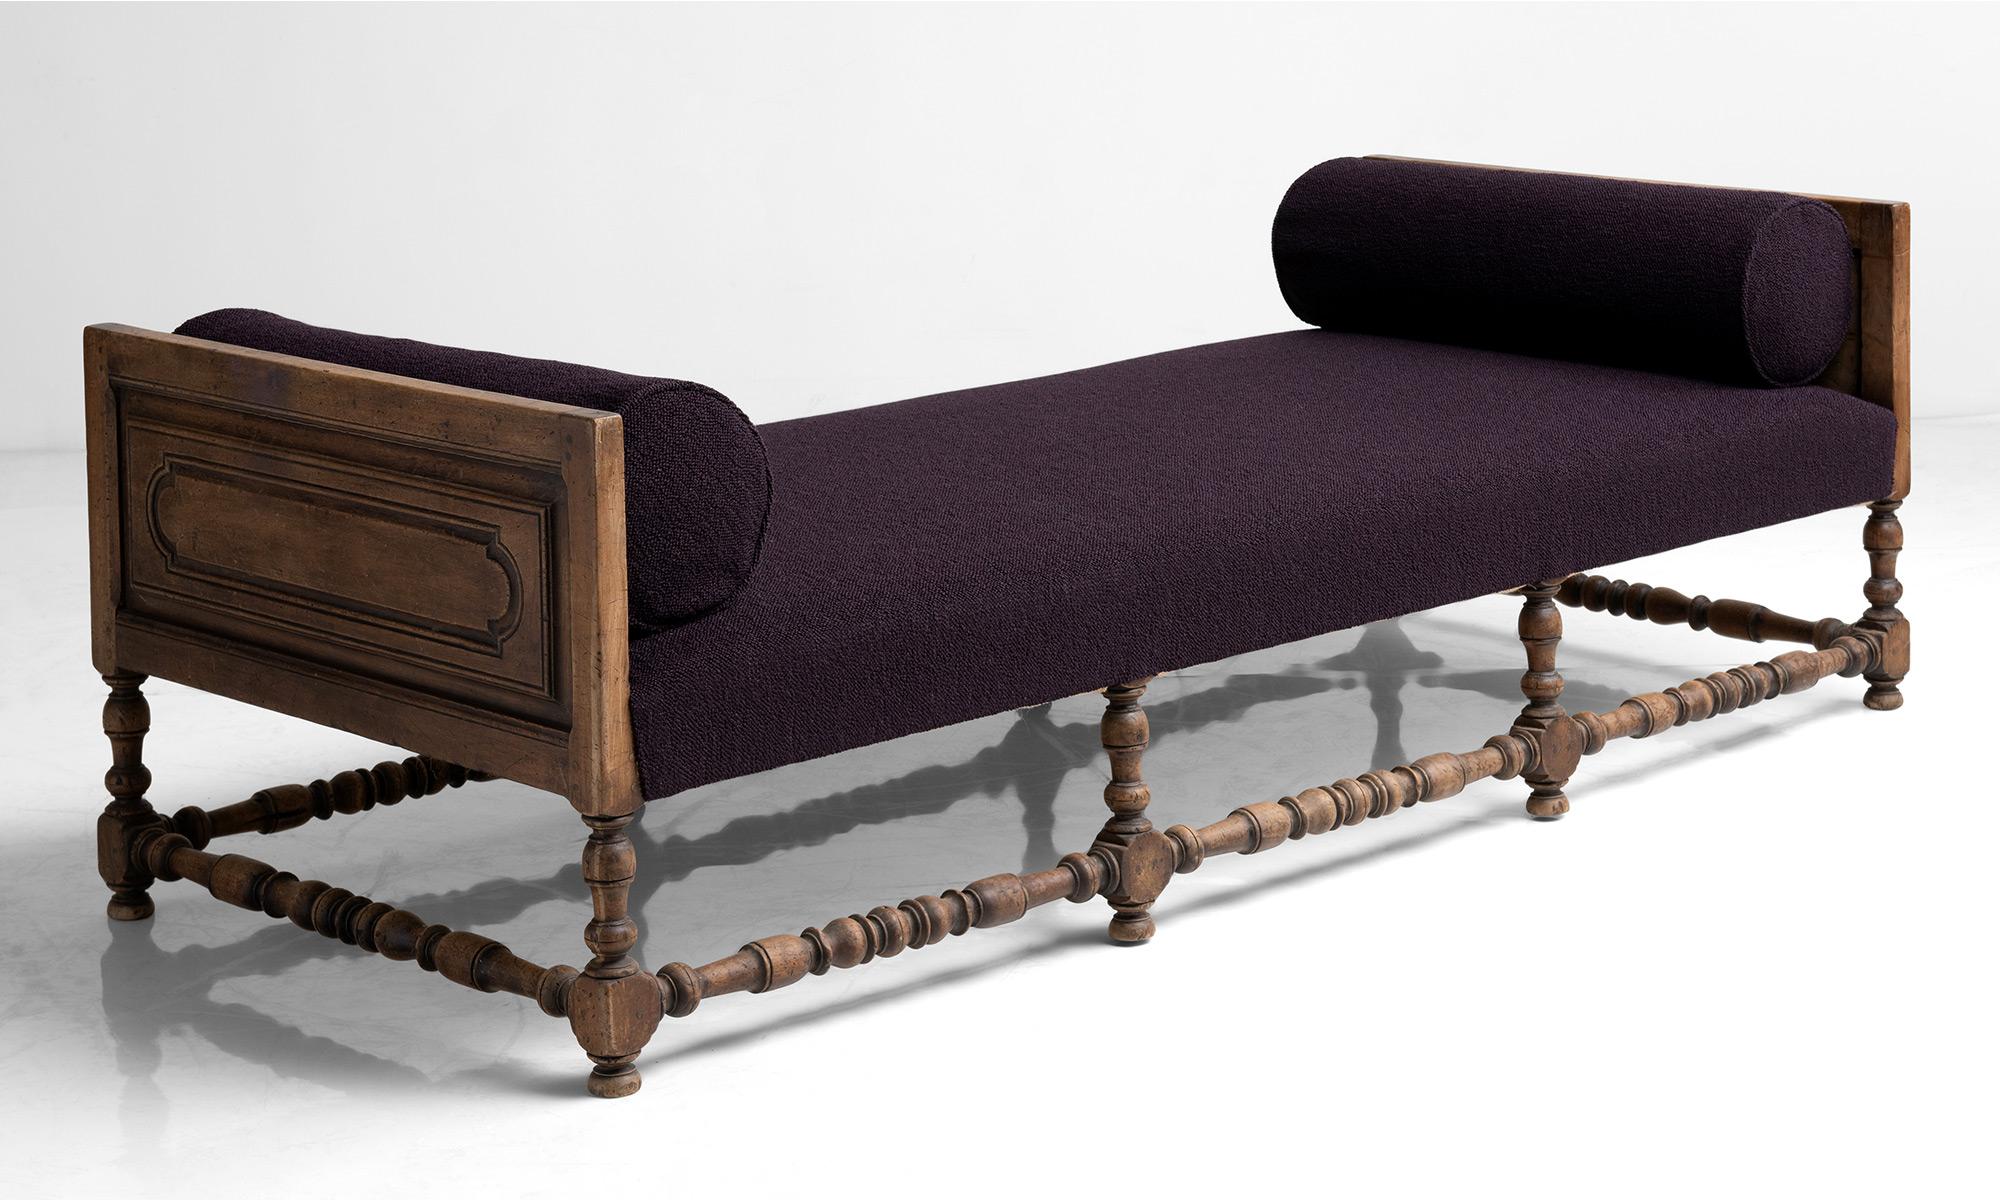 Daybed with carved walnut frame in textured wool blend by Maharam

France circa 1890

Newly upholstered in Maharam blend with carved framed, turned legs and stretchers.

79.75”L x 34.25”D x 24.5”H x 16”seat.